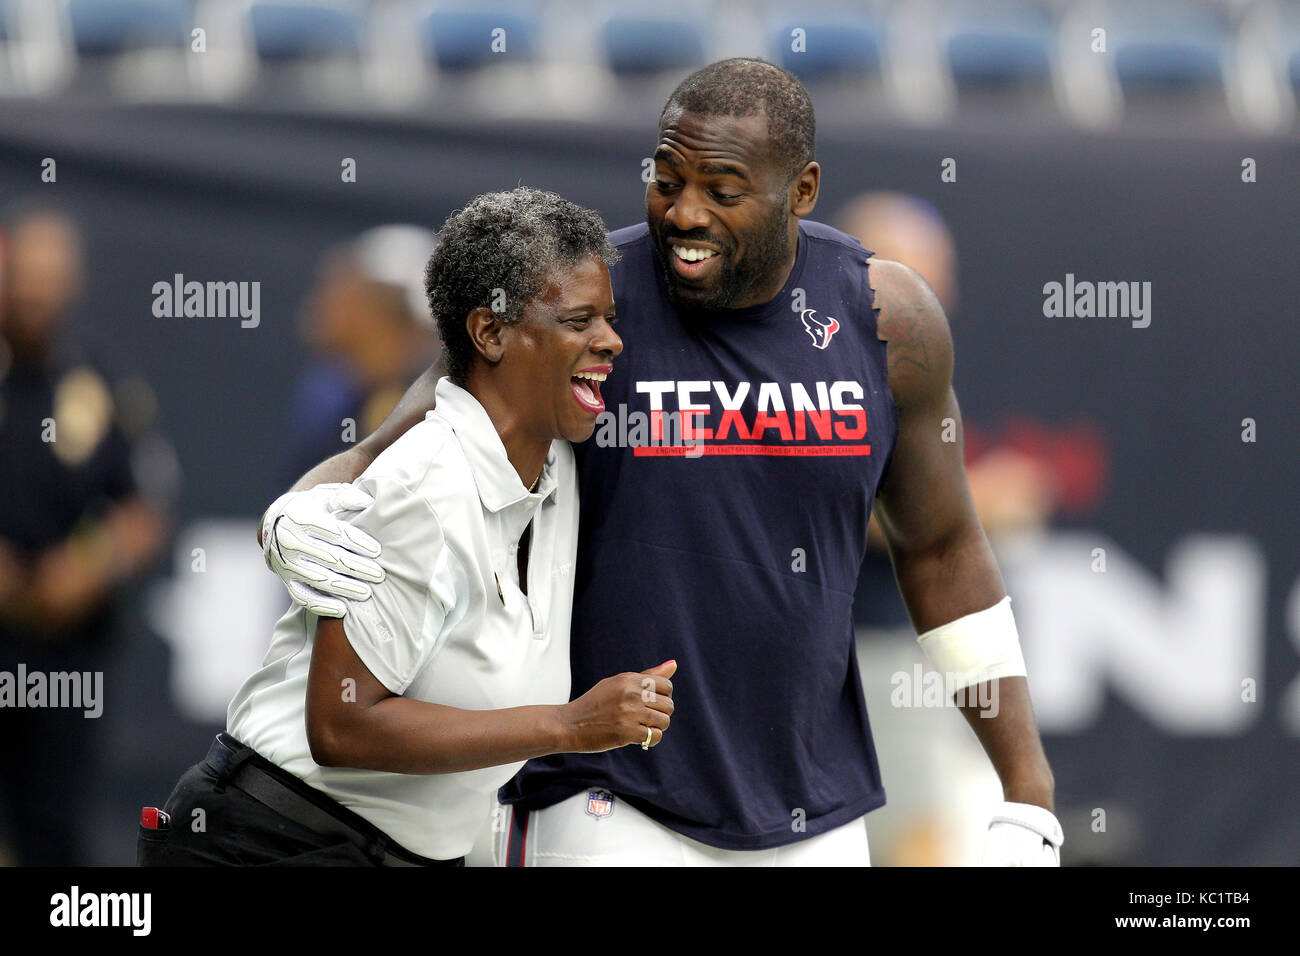 Houston, Texas, USA. 1st Oct, 2017. Houston Texans outside linebacker Whitney Mercilus (59, right) shares a light moment with an NRG Stadium worker prior to an NFL regular season game between the Houston Texans and the Tennessee Titans in Houston, TX on October1, 2017. Credit: Erik Williams/ZUMA Wire/Alamy Live News Stock Photo